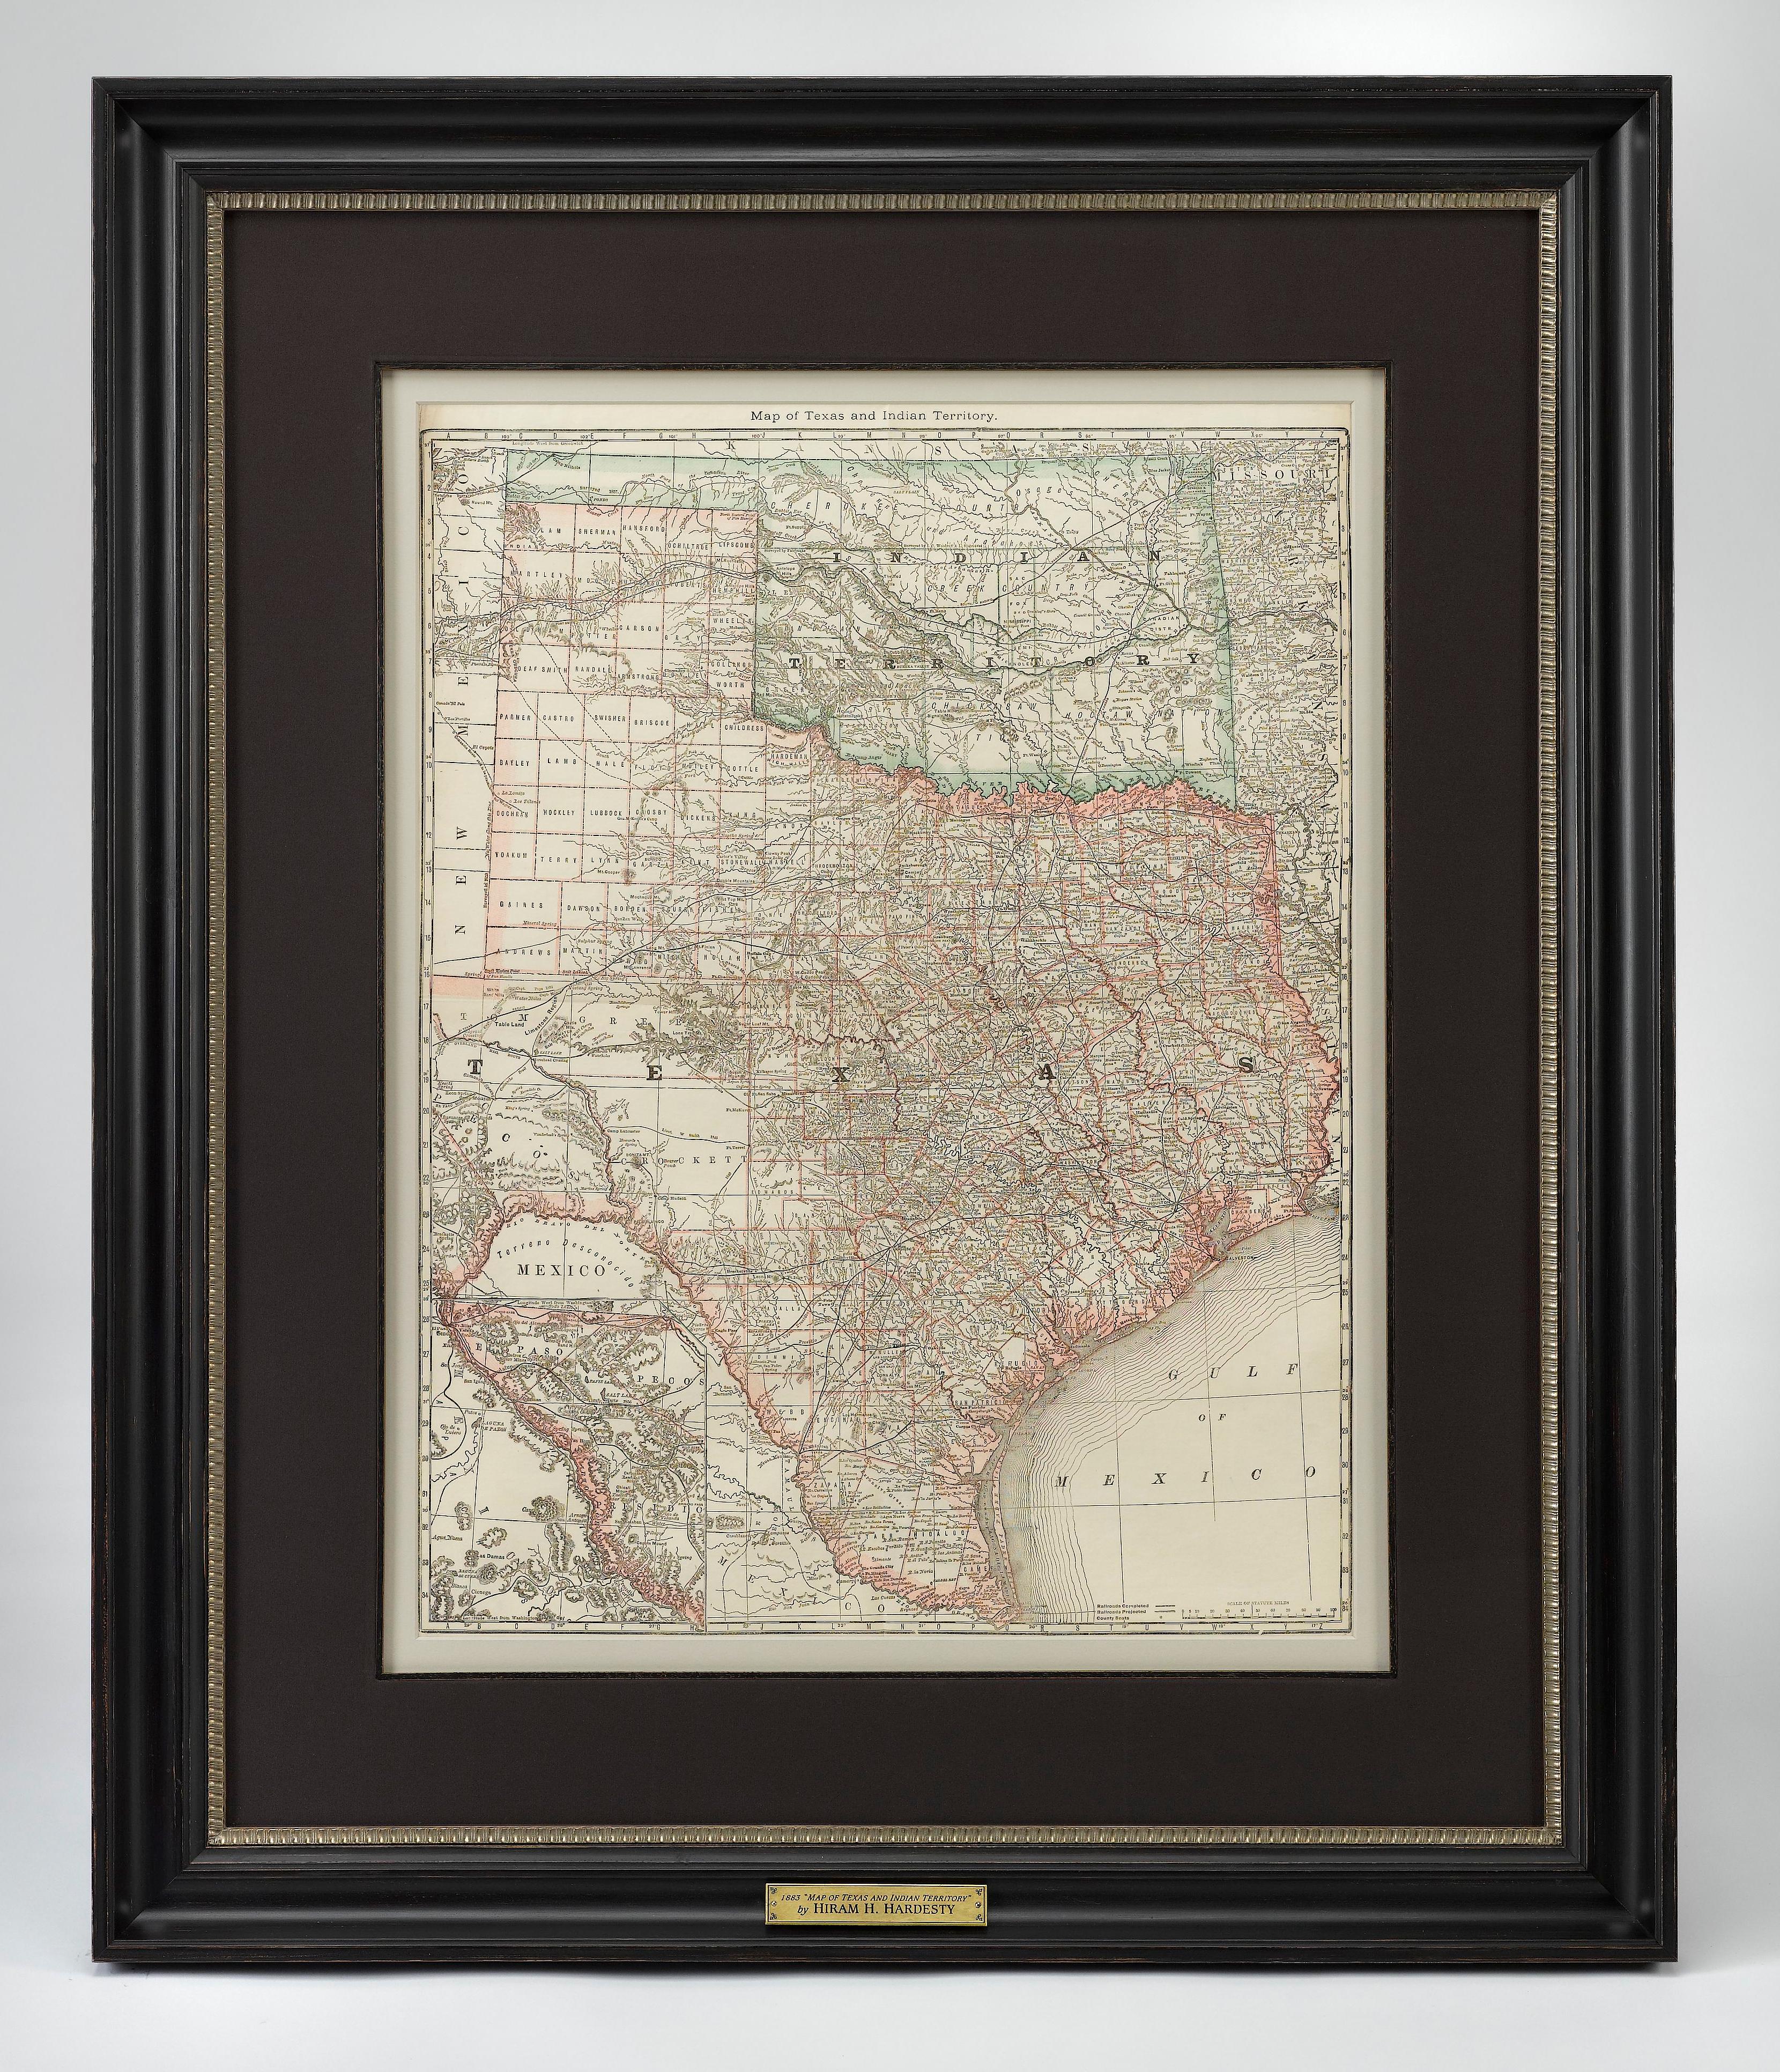 Presented is a very detailed “Map of Texas and Indian Territory” by Hiram H. Hardesty. This map is published in atlas form, originally part of the 1883 edition of Hardesty’s “Historical and Geographical Encyclopaedia.”

The map is very